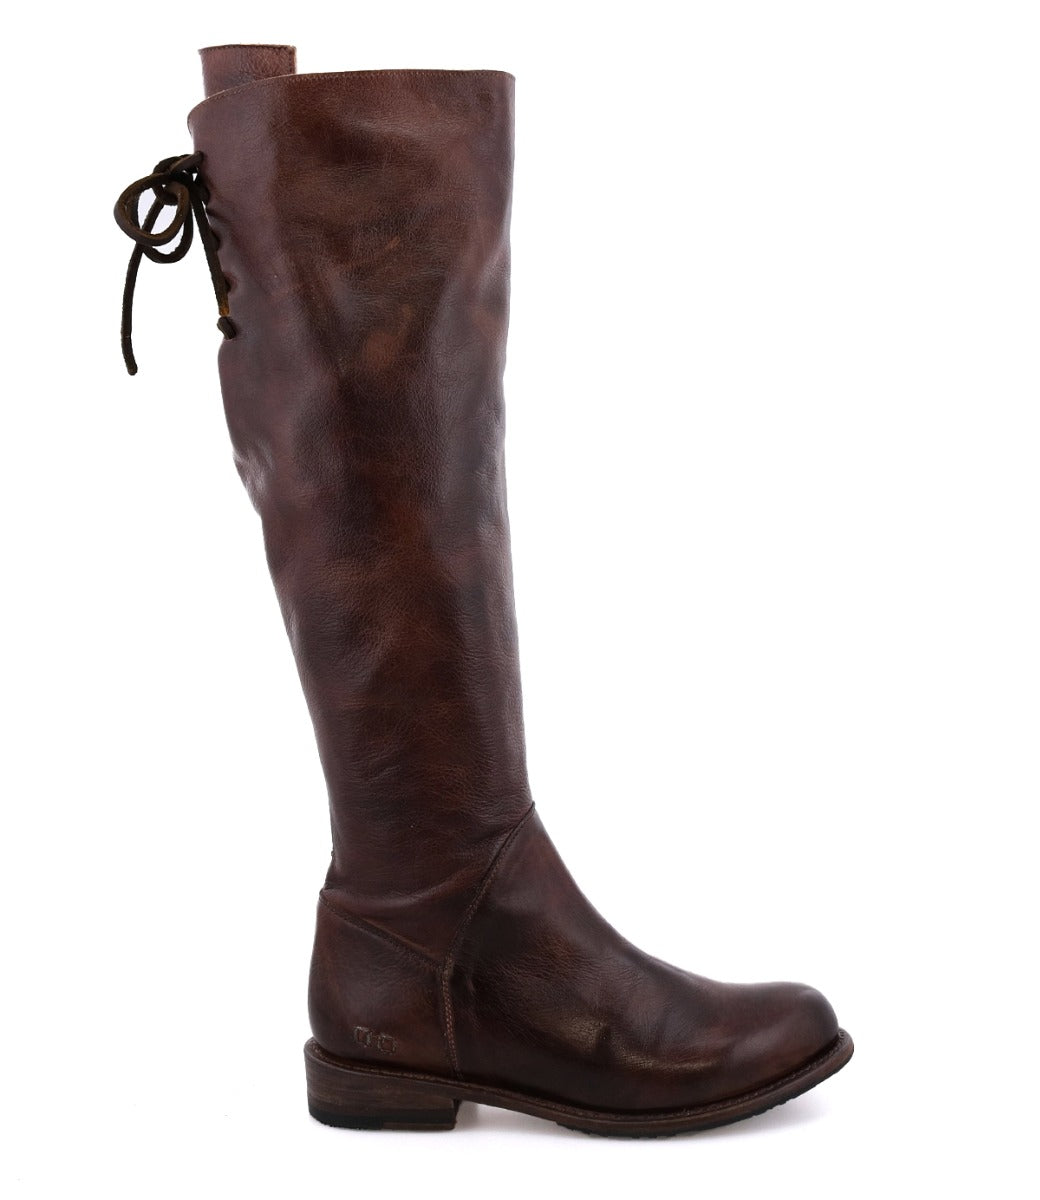 Manchester - Classic Leather Boot for Women | Bed|Stu – Bed|Stü